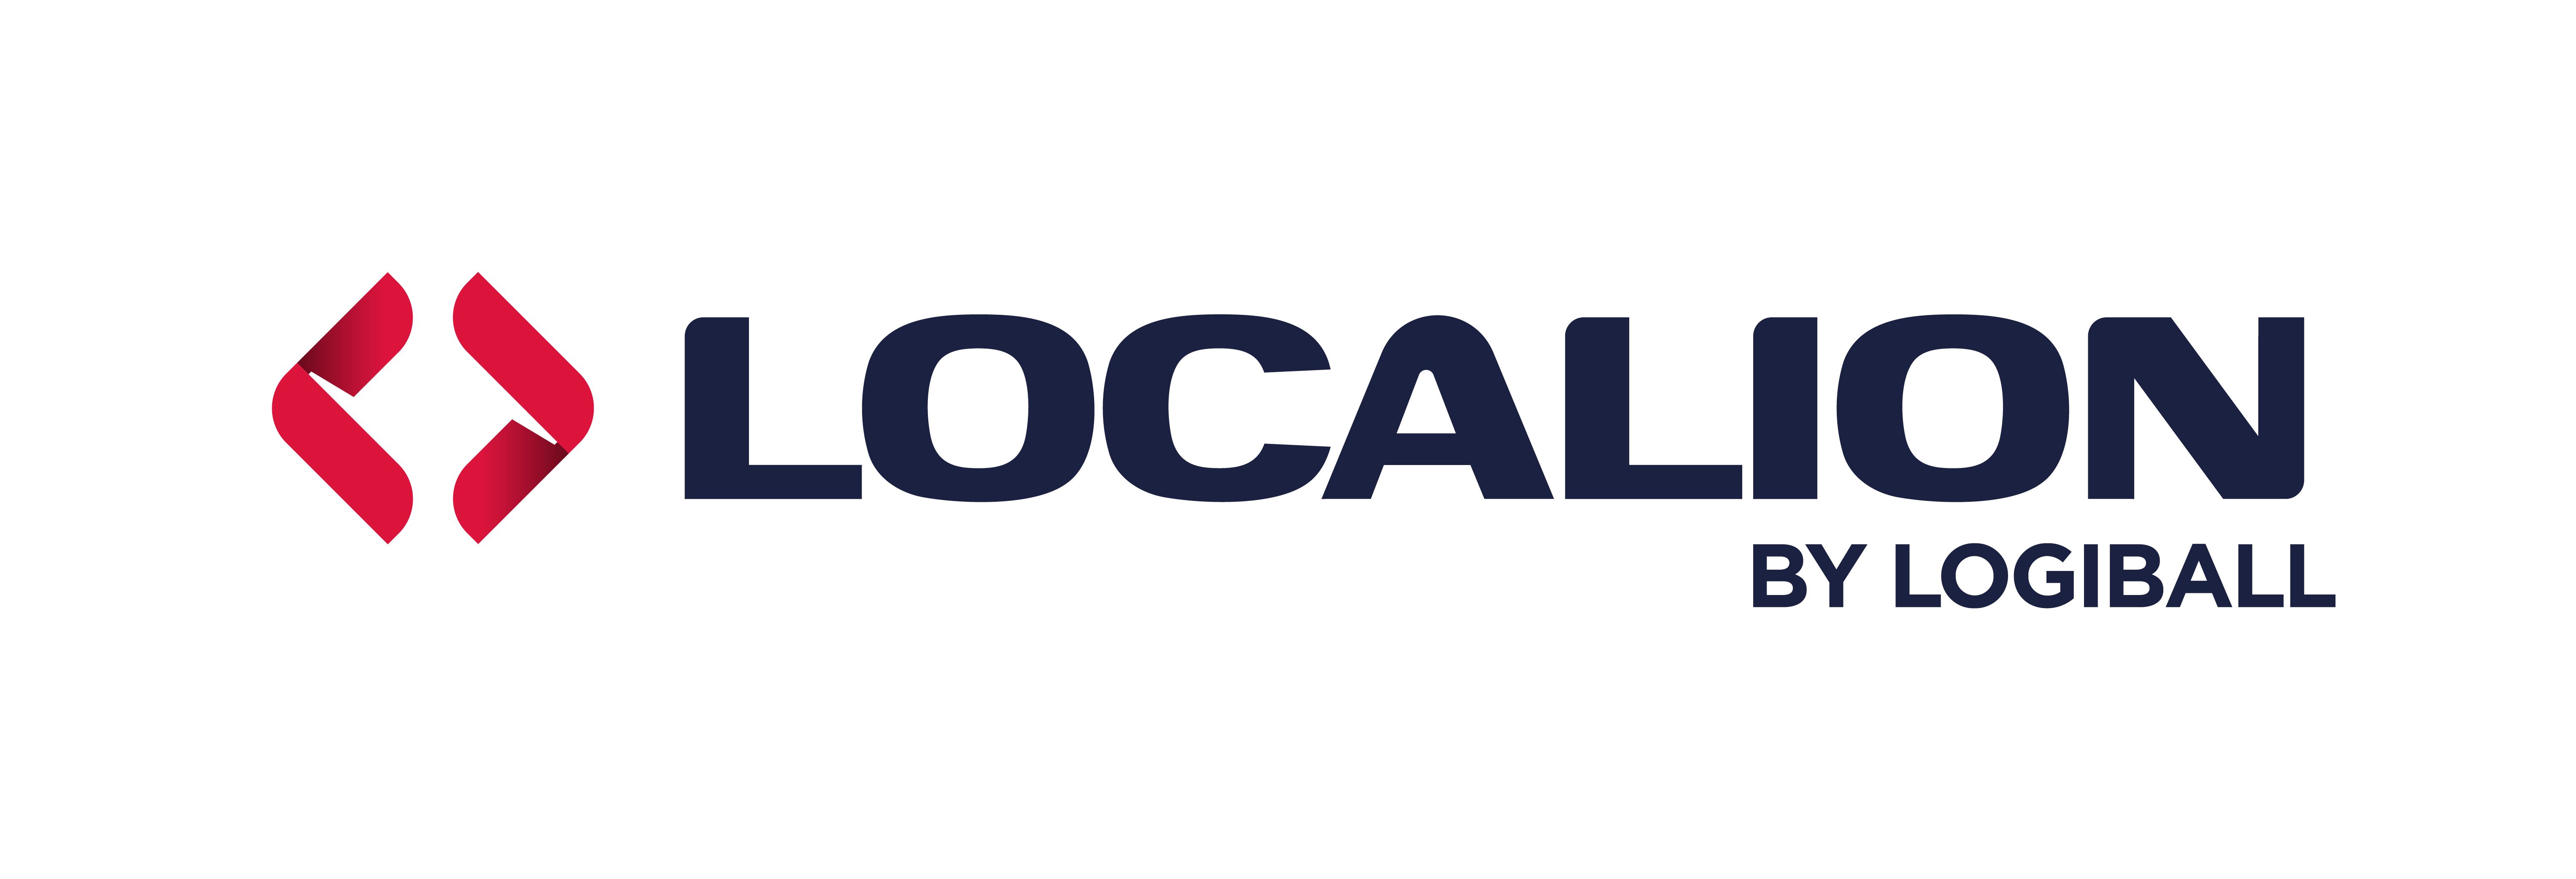 LOCALION by Logiball GmbH